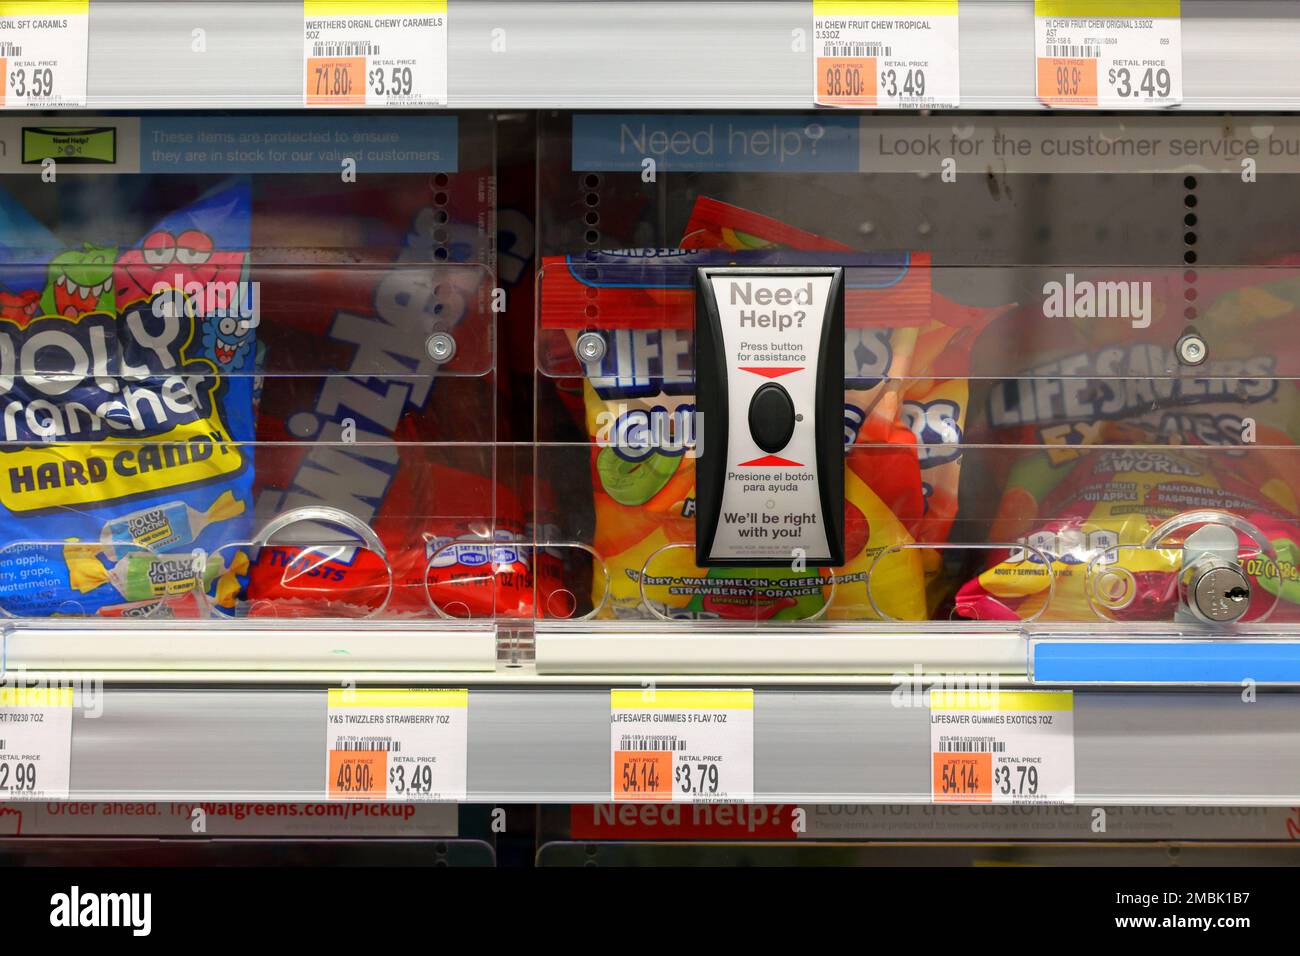 Candy on a locked store shelf with a wireless customer service call button requesting help unlocking said items at a Walgreens drugstore. Stock Photo